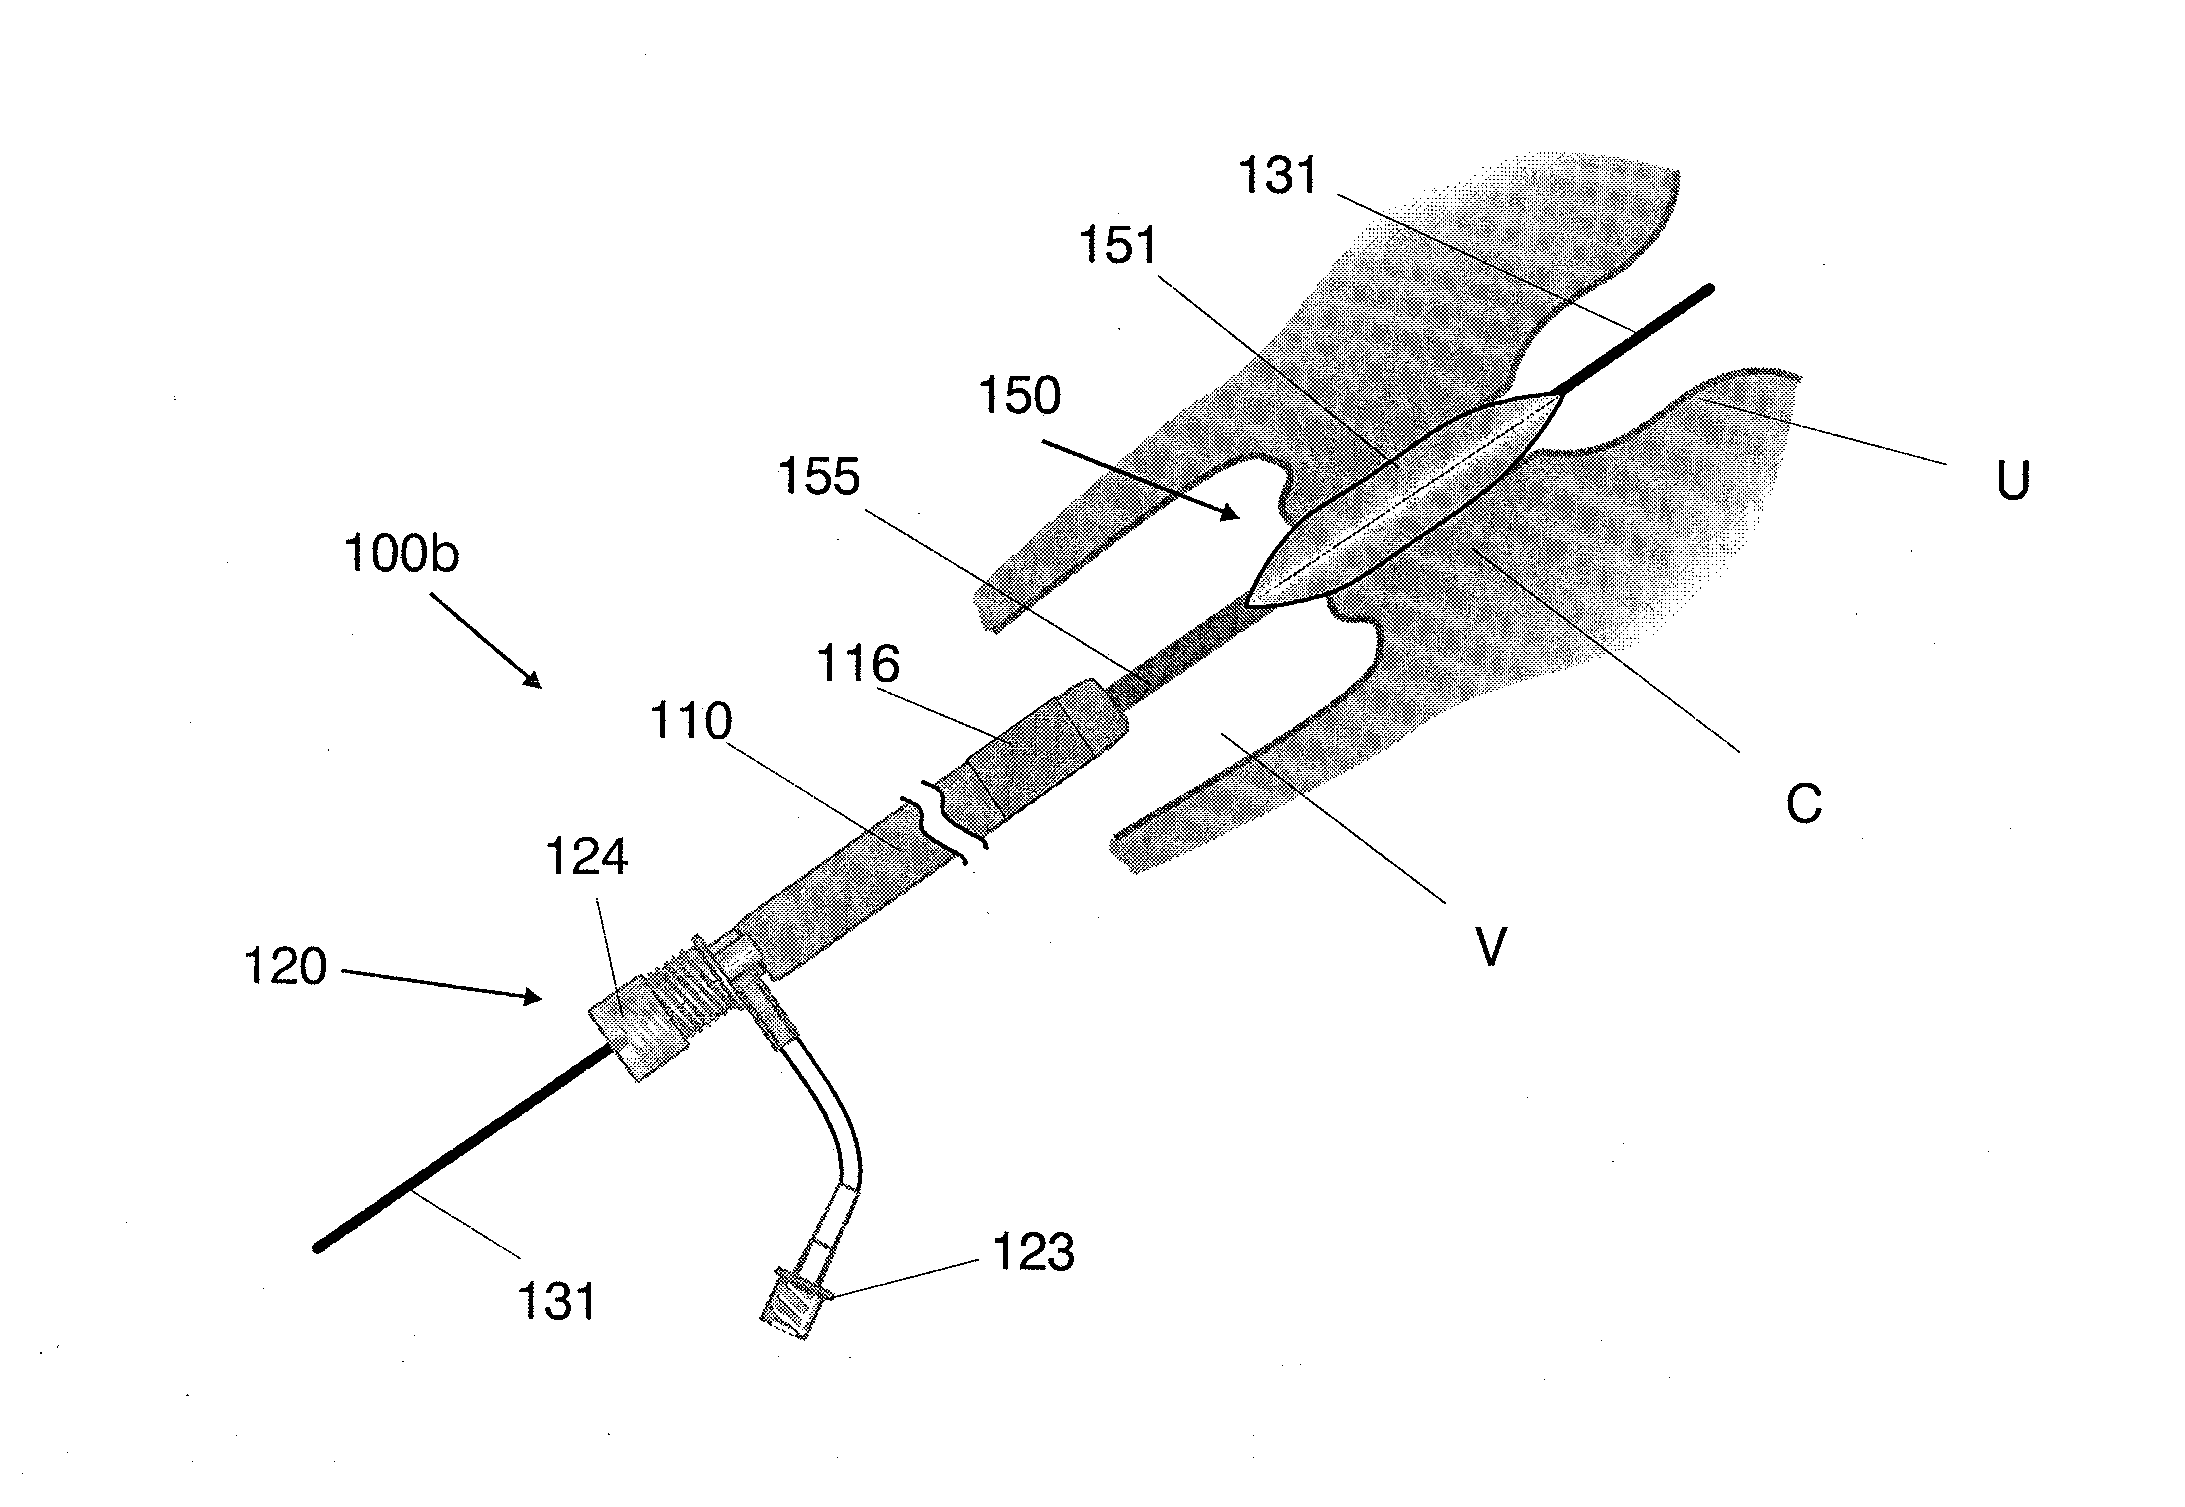 Systems for performing gynecological procedures with mechanical distension